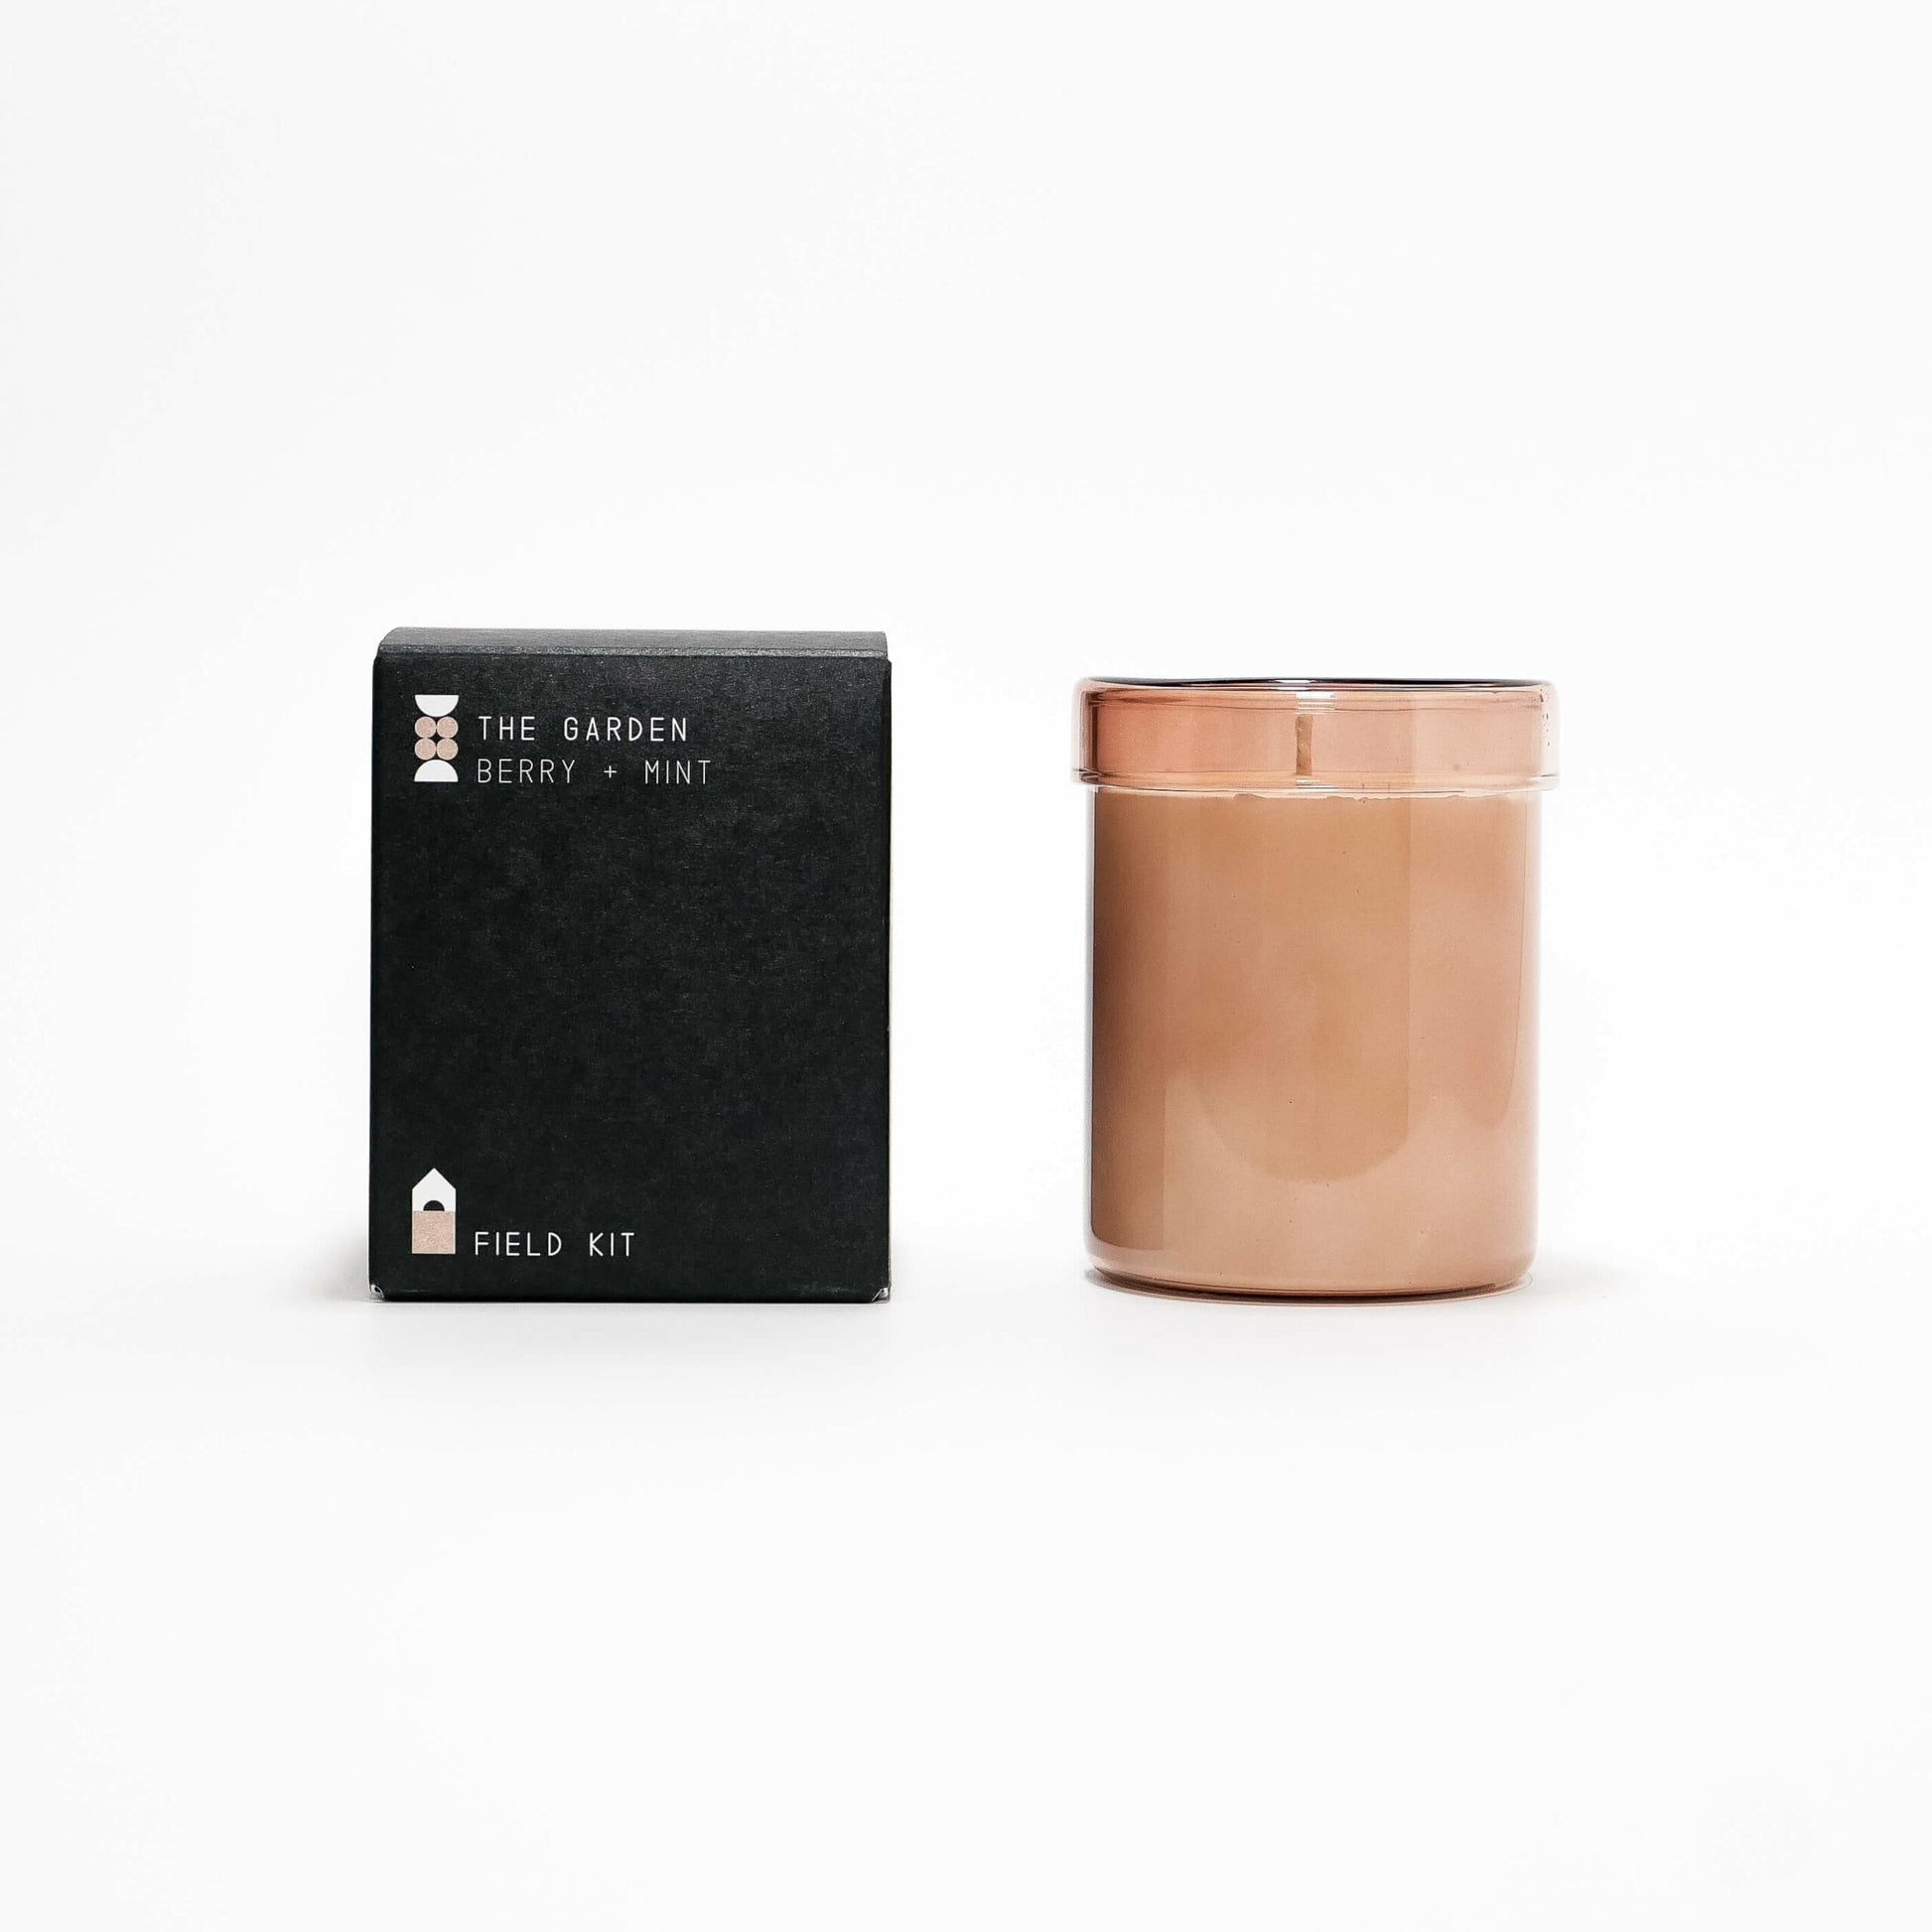 The Garden Scented Candle by Field Kit